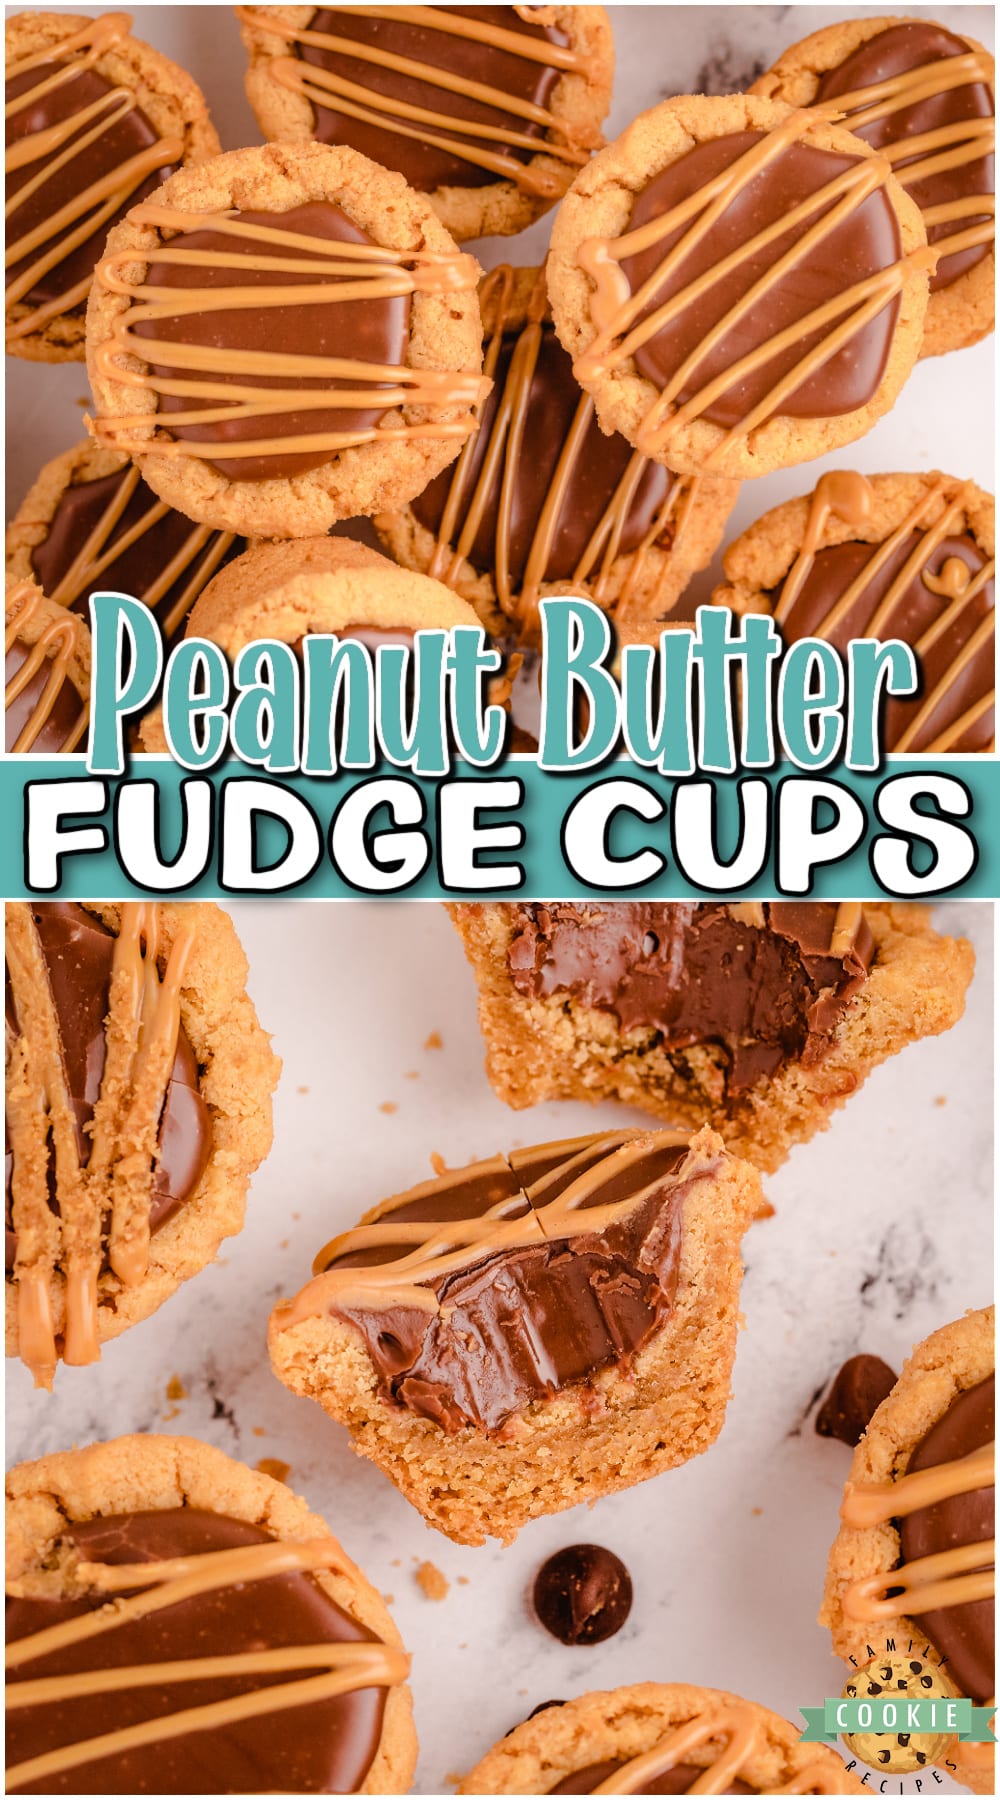 Fudge Peanut Butter Cookie Cups are peanut butter cookies baked in a mini muffin pan & filled with a simple chocolate fudge! Delicious flavor combination in these amazing fudge cookies. via @buttergirls